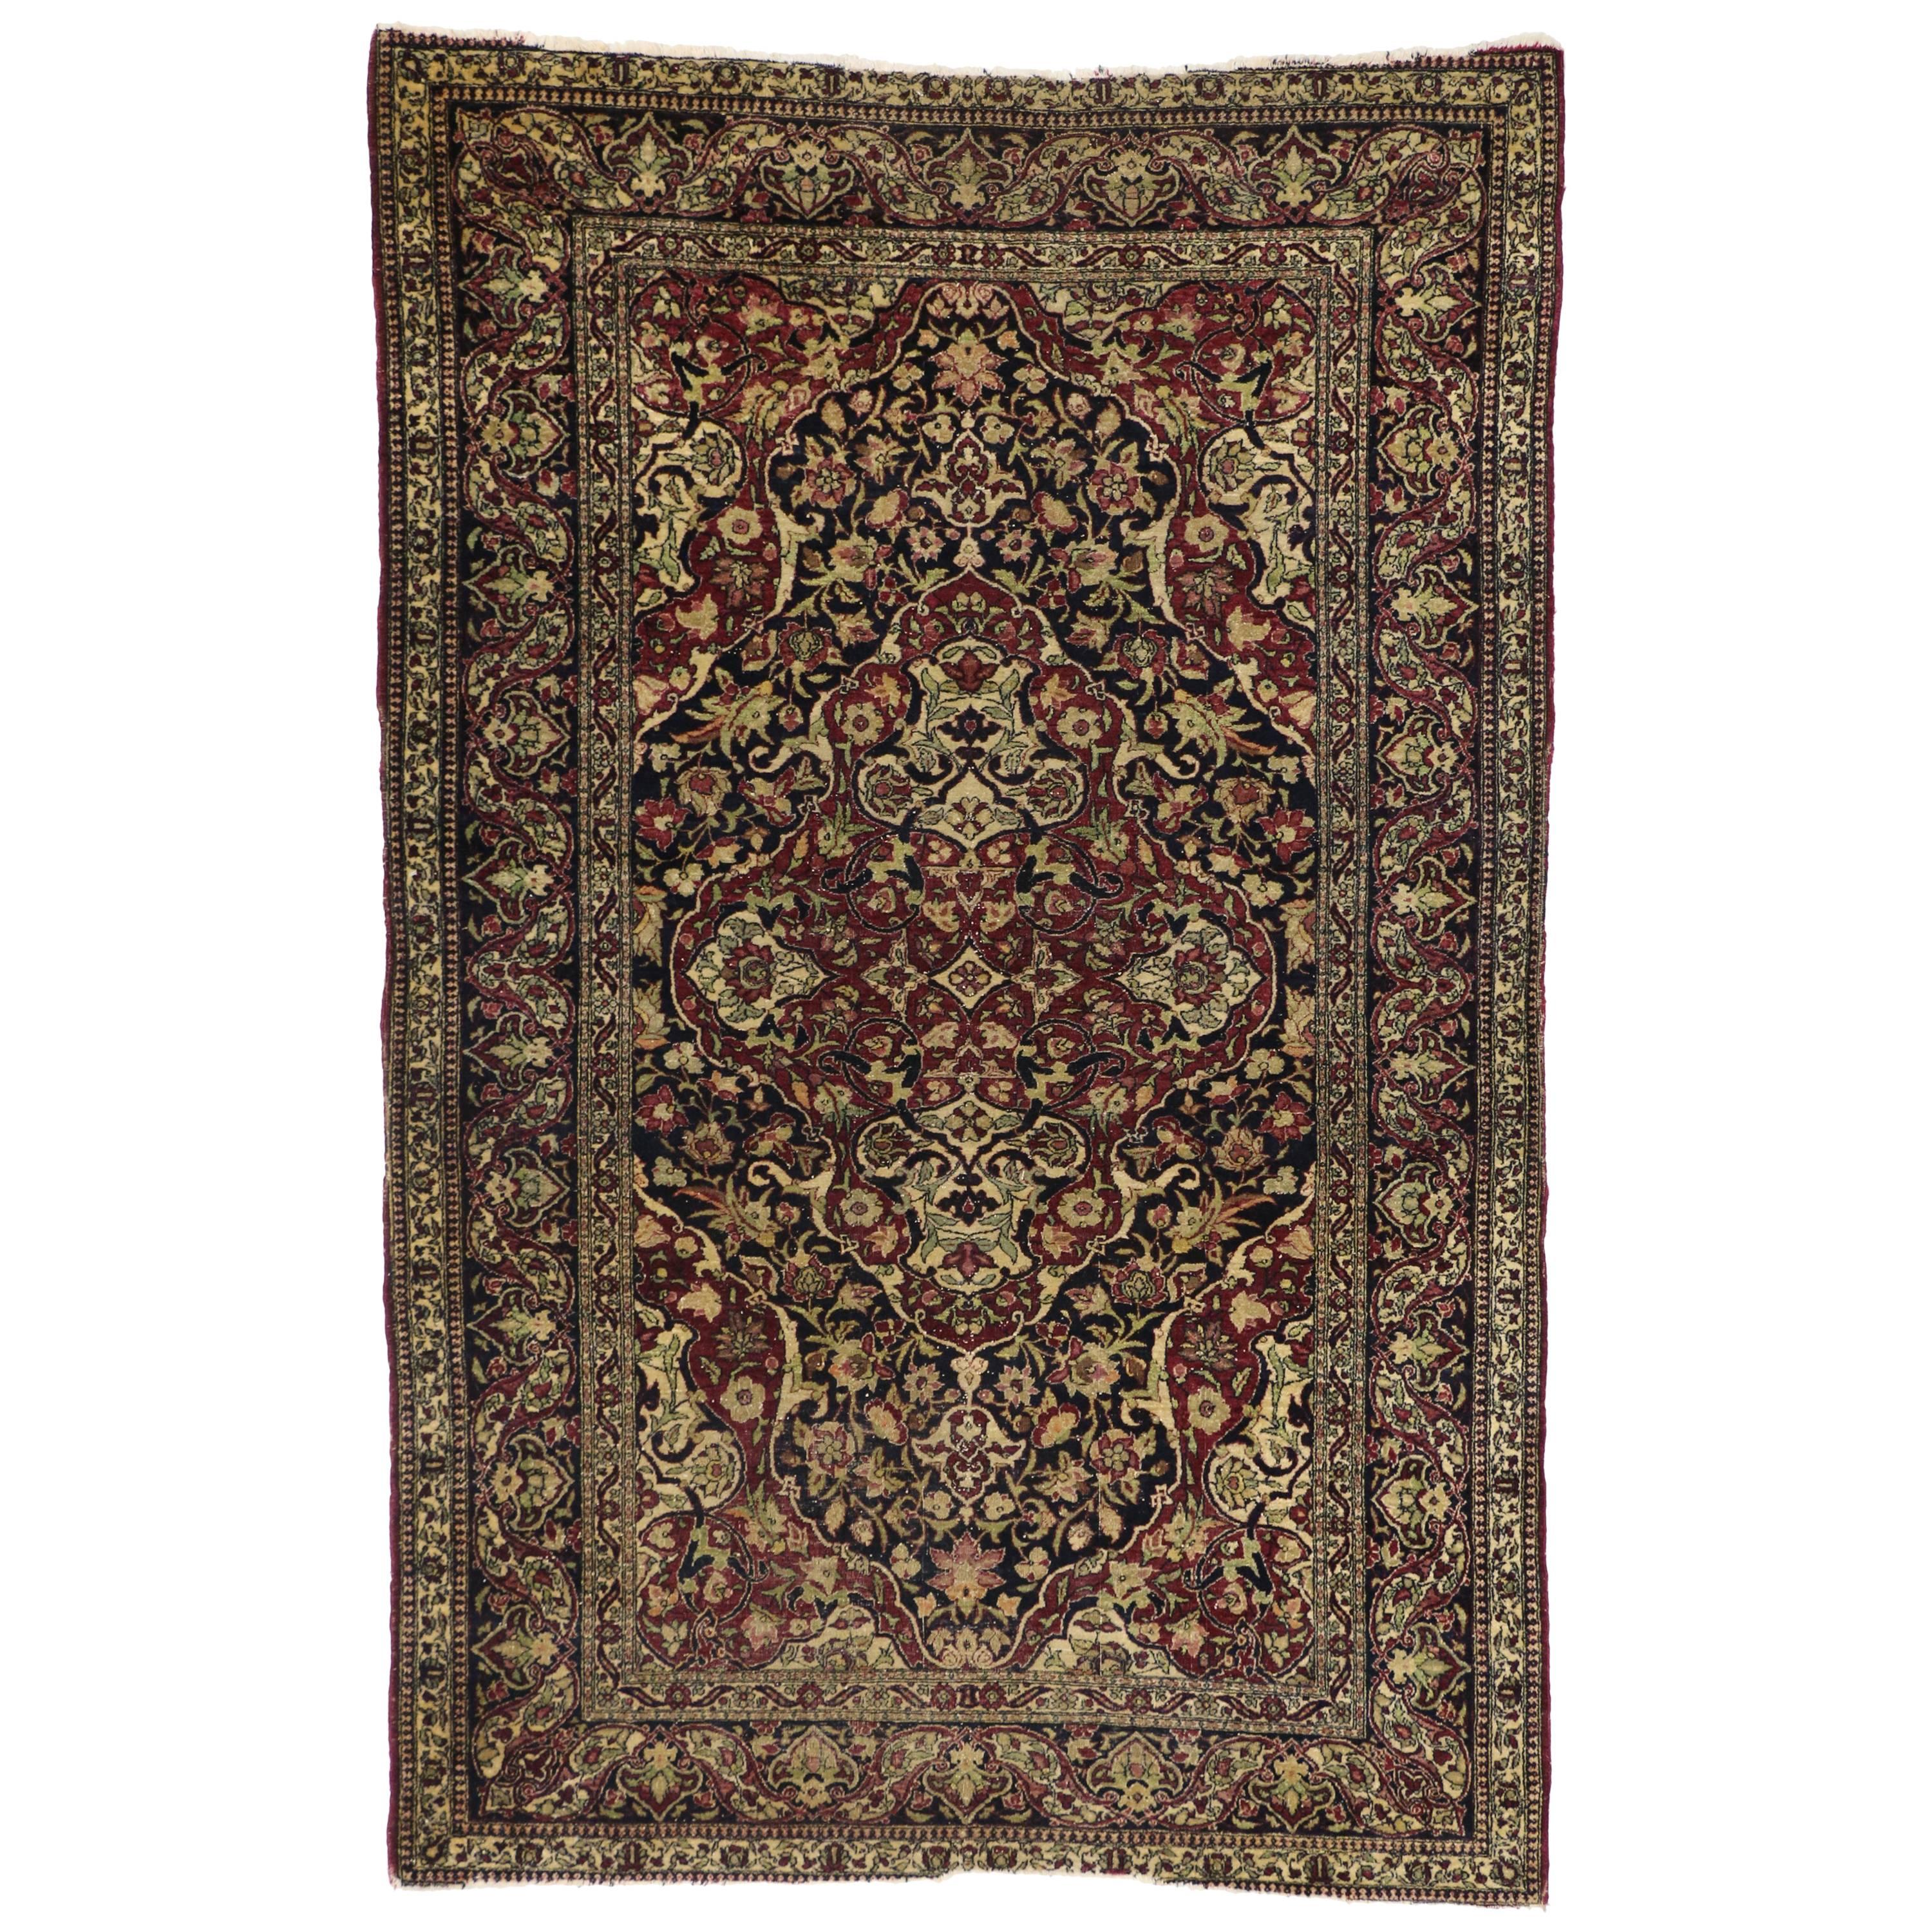 Antique Persian Kerman Rug with Traditional Style, Antique Kirman Persian Rug